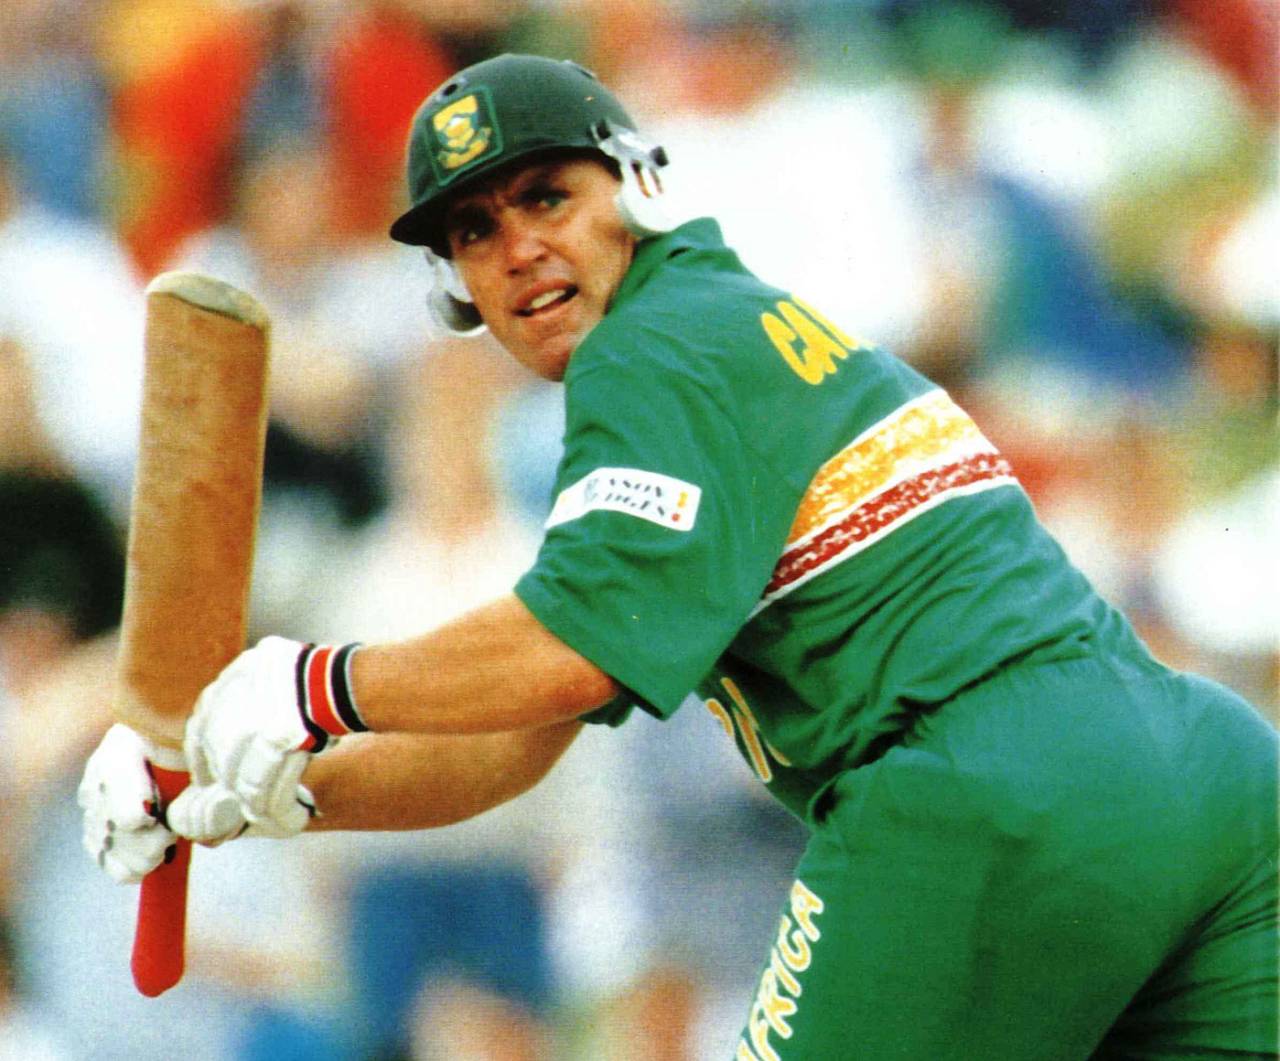 Dave Callaghan's unbeaten 169 was the highest score by a South African in an ODI at the time&nbsp;&nbsp;&bull;&nbsp;&nbsp;Dave Callaghan